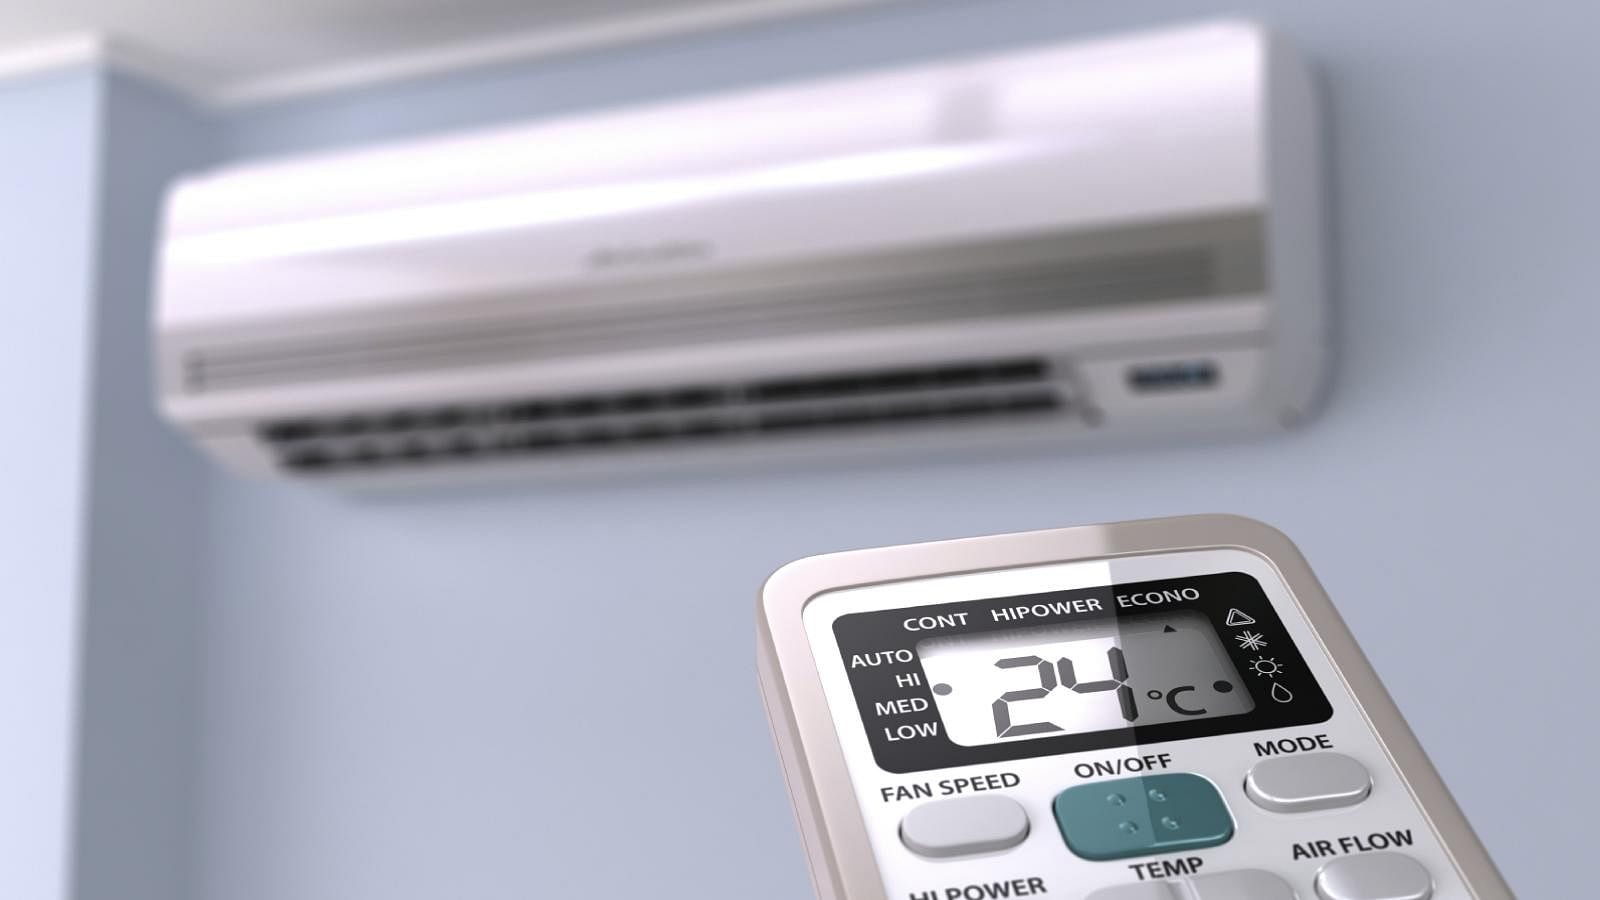 Air conditioning is a real comfort on a hot summer day, but is it hurting the environment?